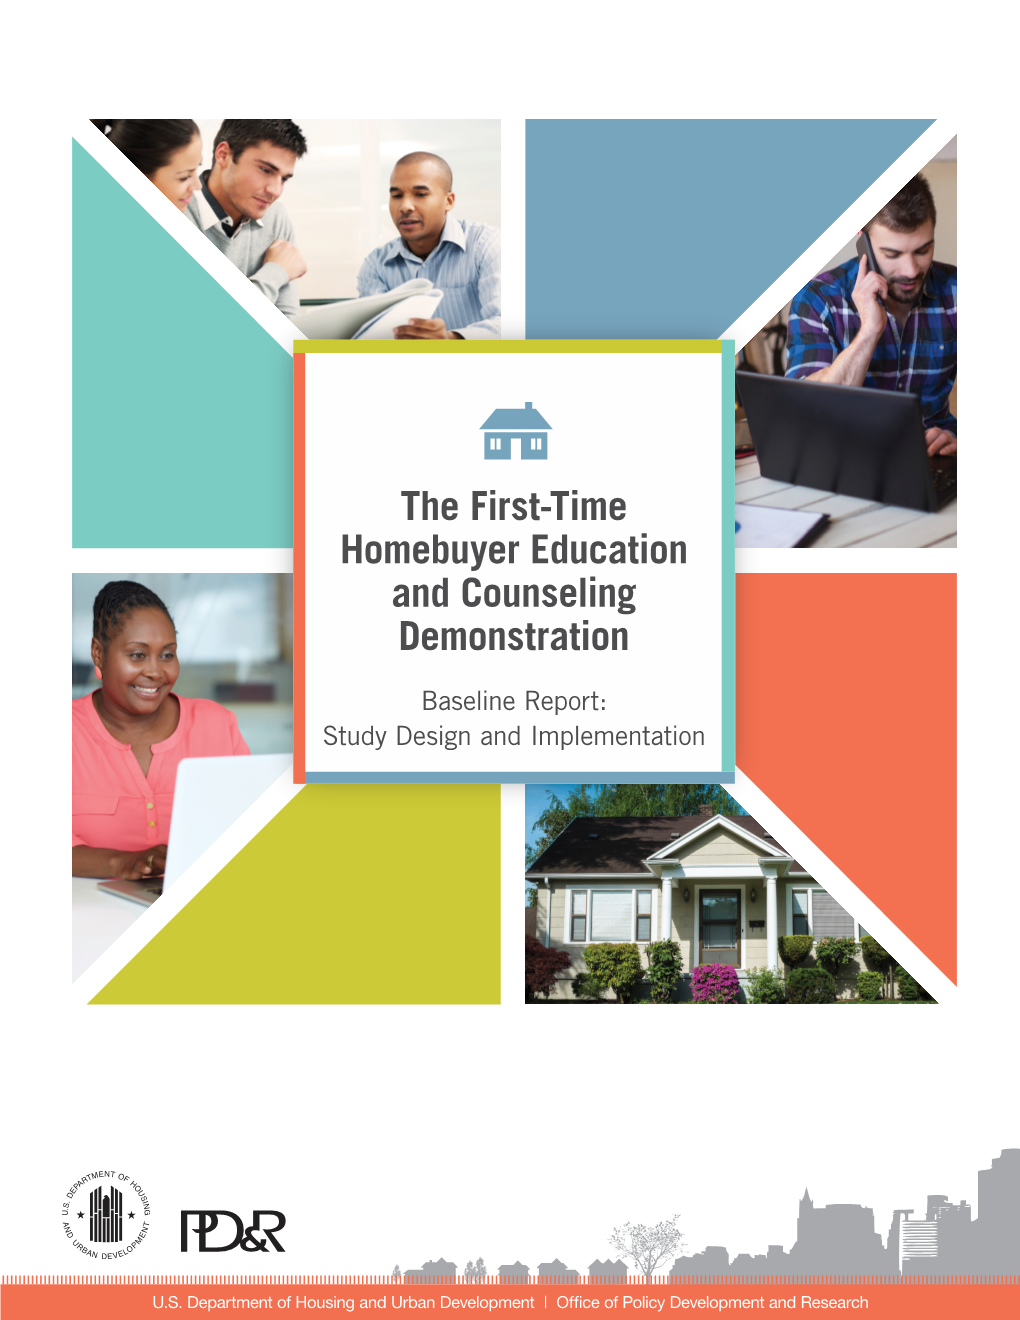 The First-Time Homebuyer Education and Counseling Demonstration